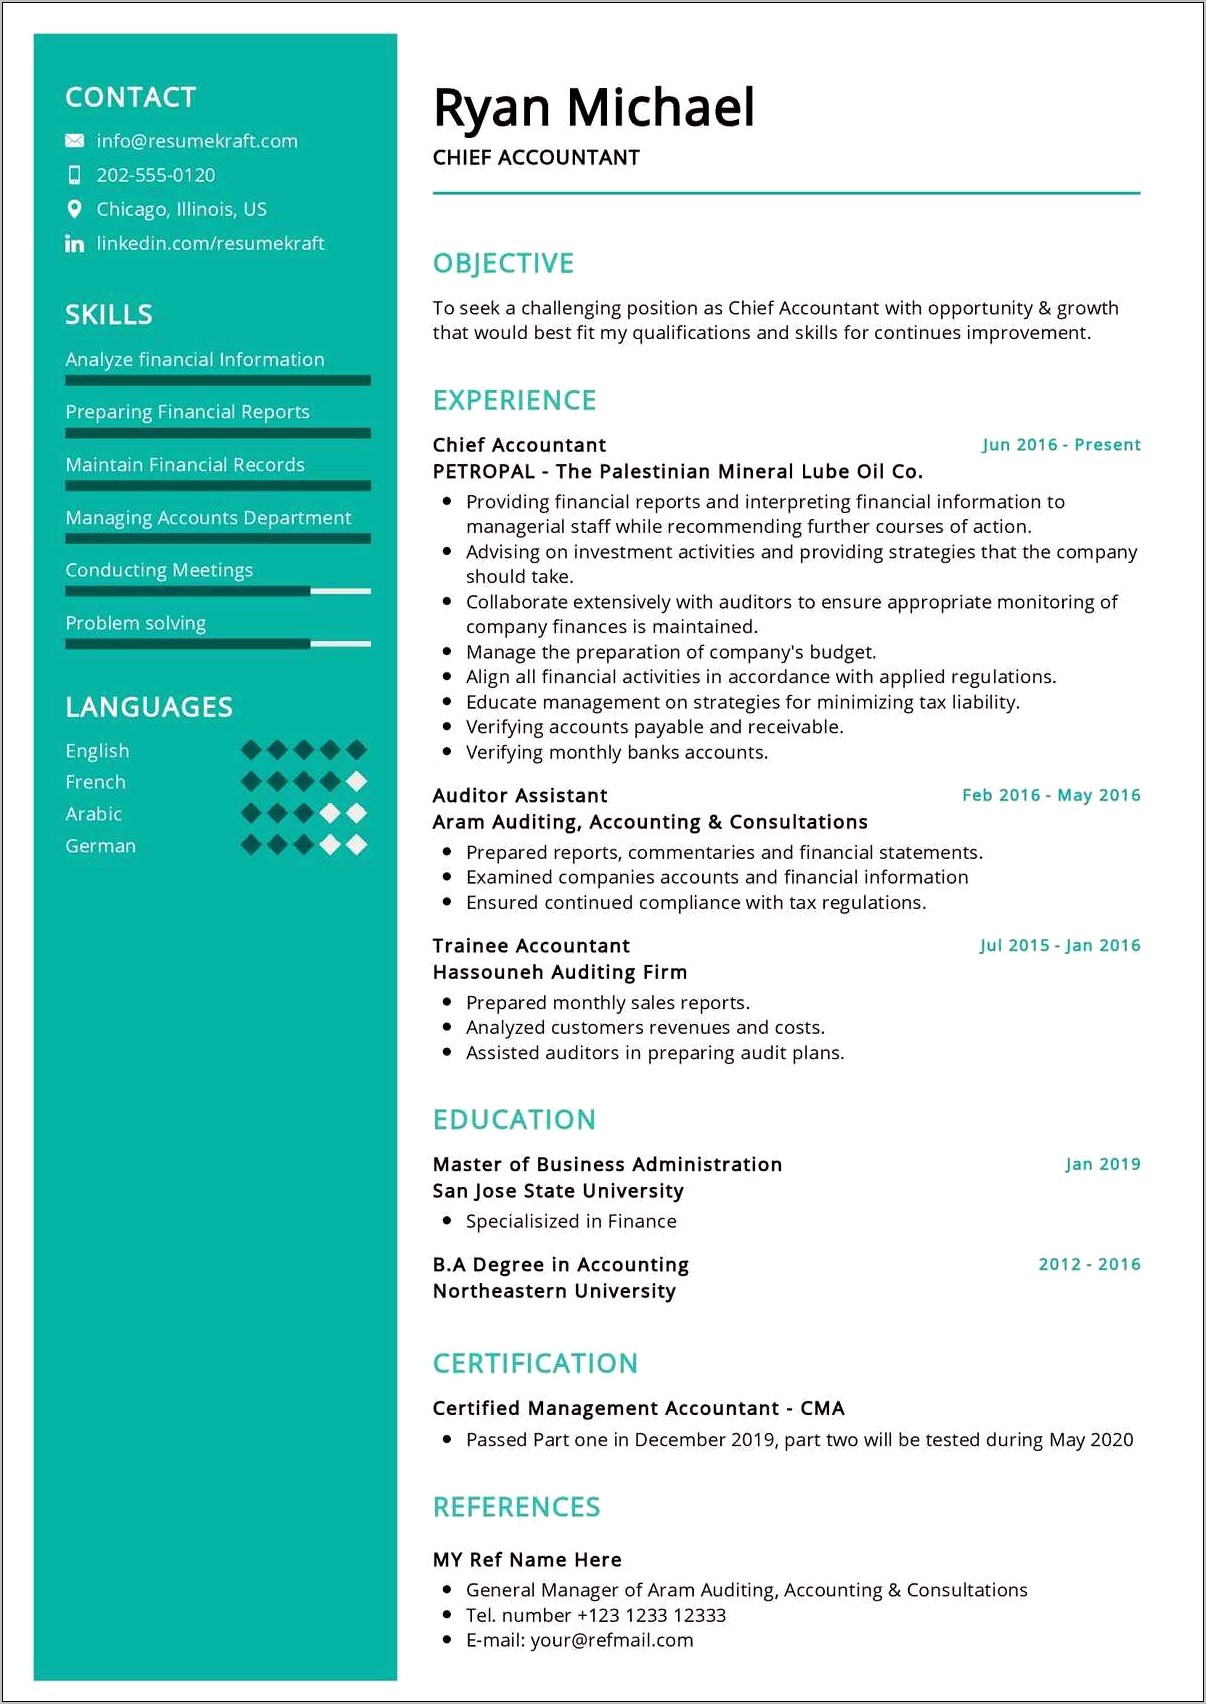 Sample Of Professional Resume For Accountant